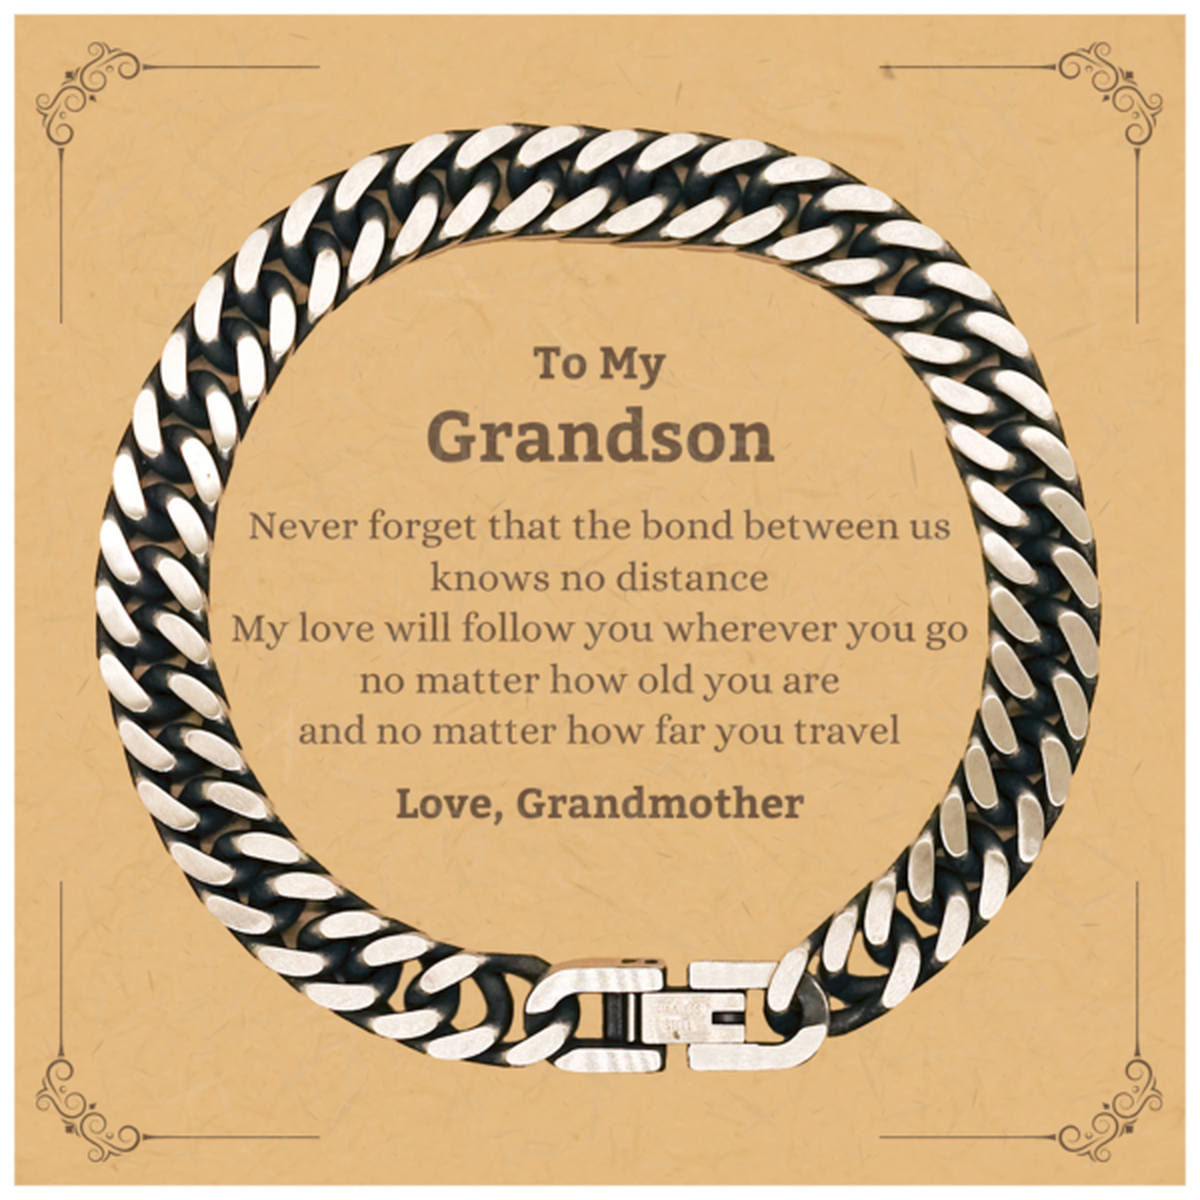 Grandson Birthday Gifts from Grandmother, Adjustable Cuban Link Chain Bracelet for Grandson Christmas Graduation Unique Gifts Grandson Never forget that the bond between us knows no distance. Love, Grandmother